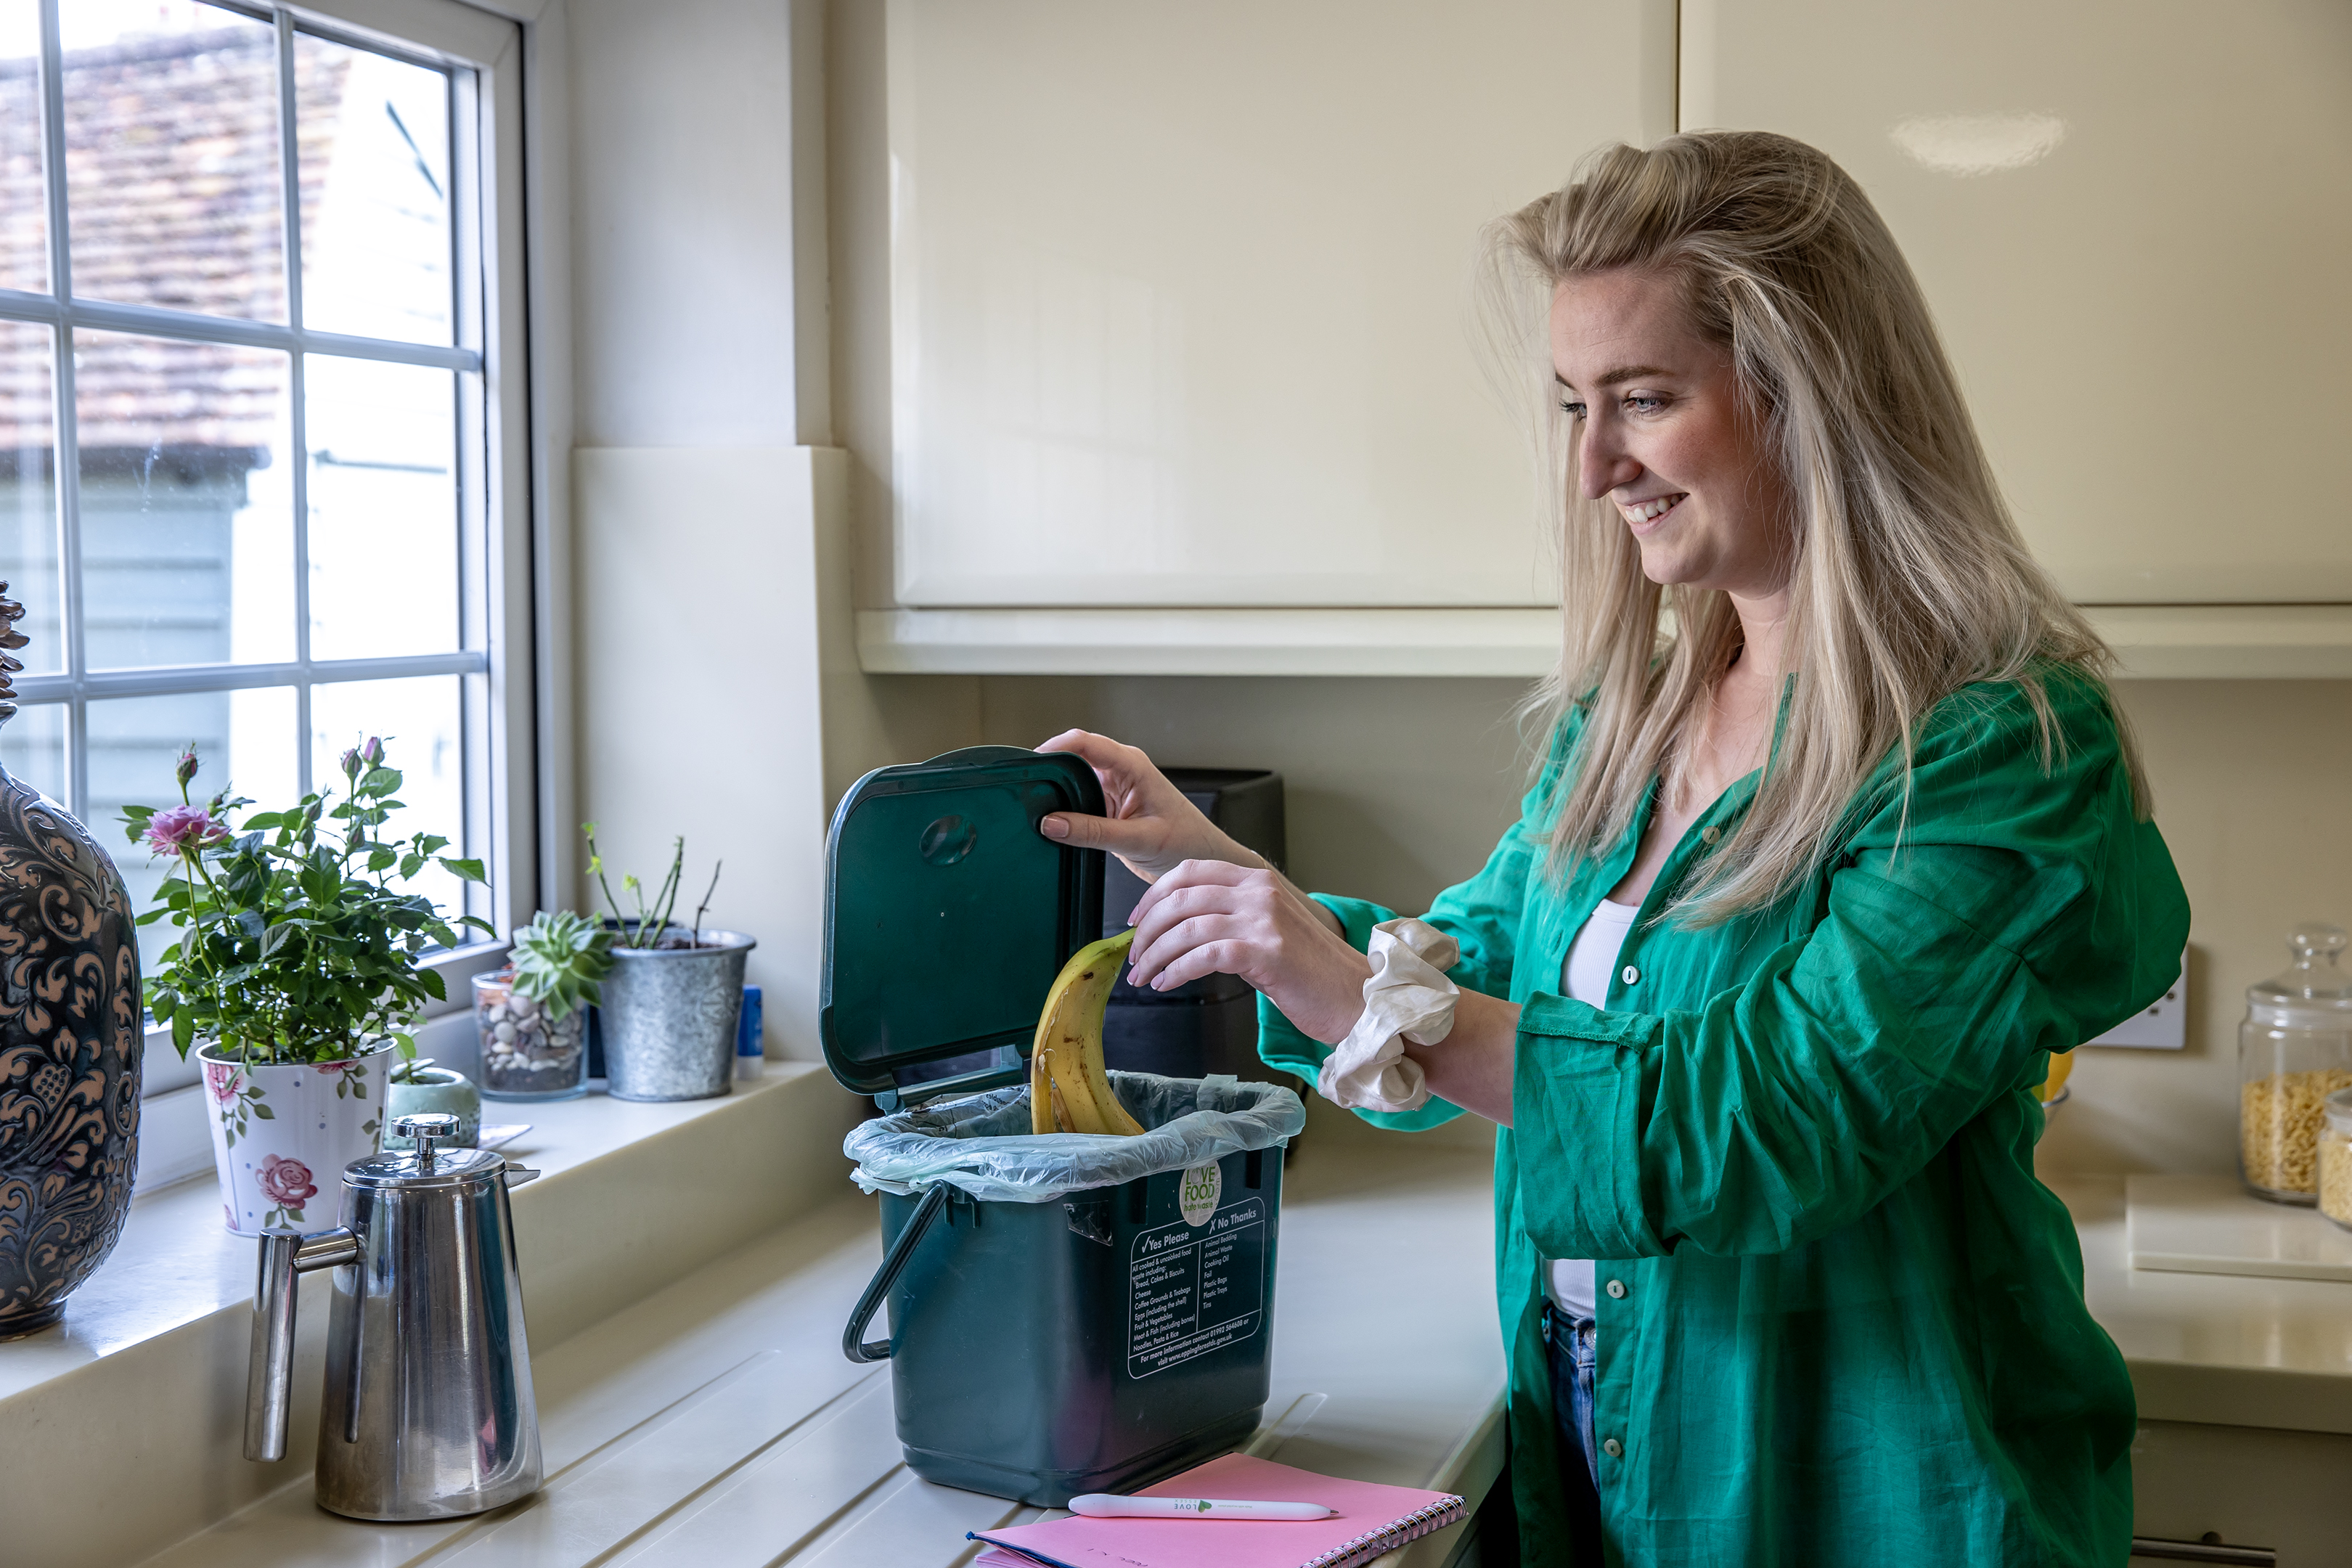 Image - a photo of a women putting food in her food waste bin.